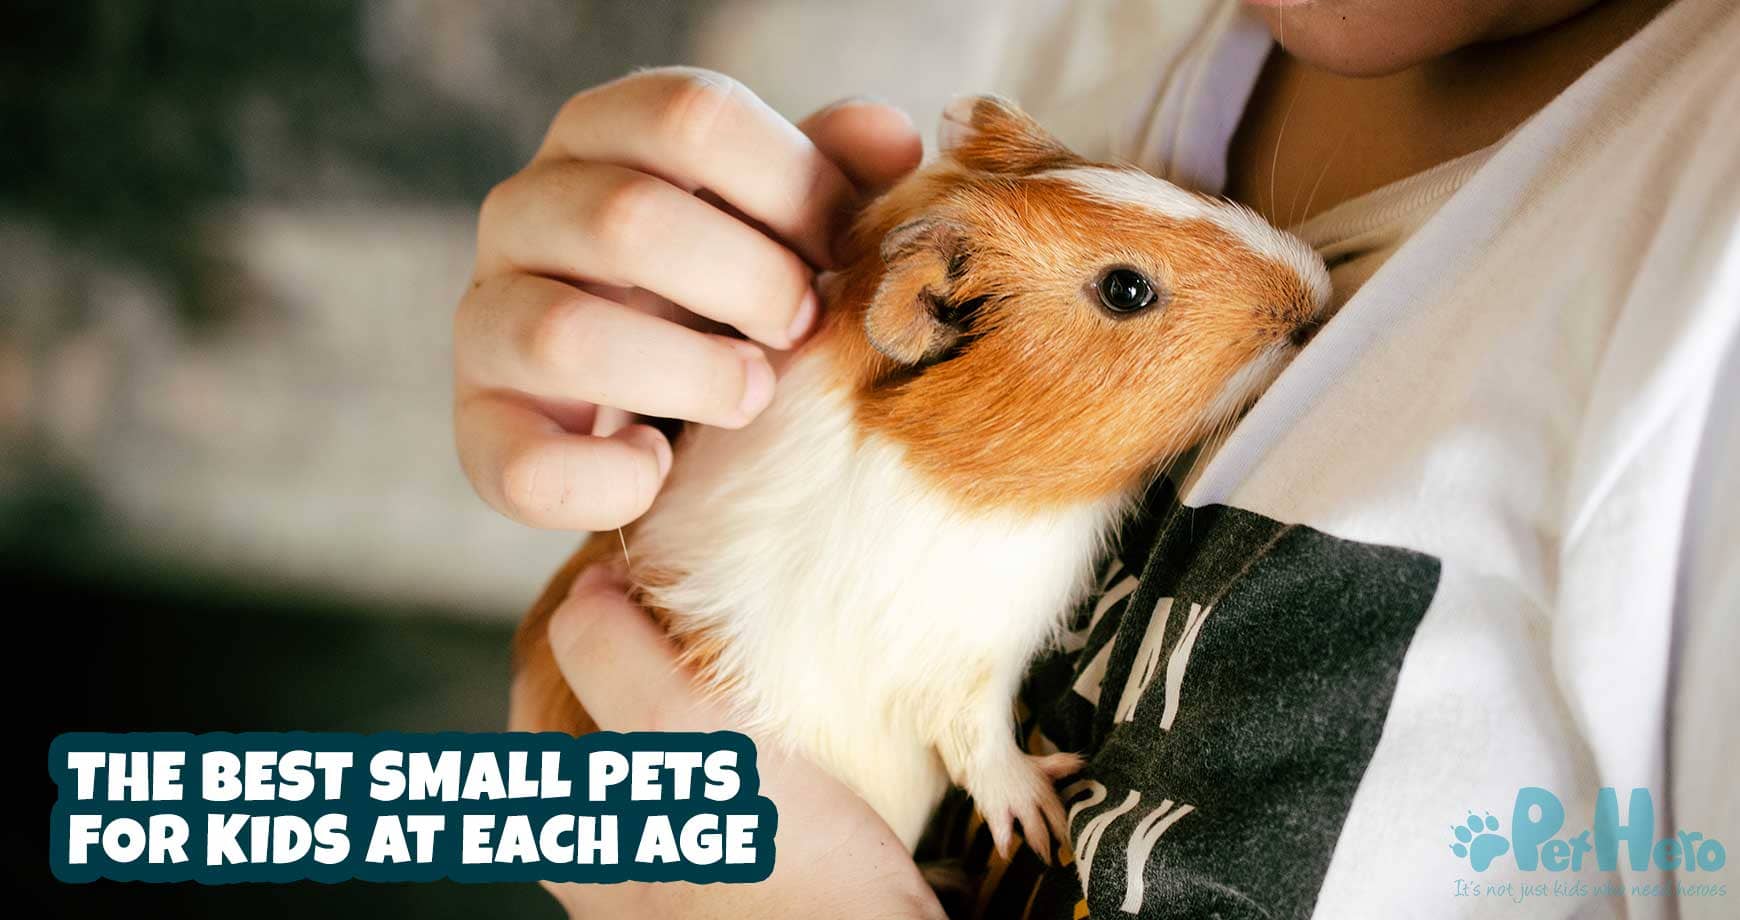 The Best Small Pets For Kids At Each Age | Pet Hero